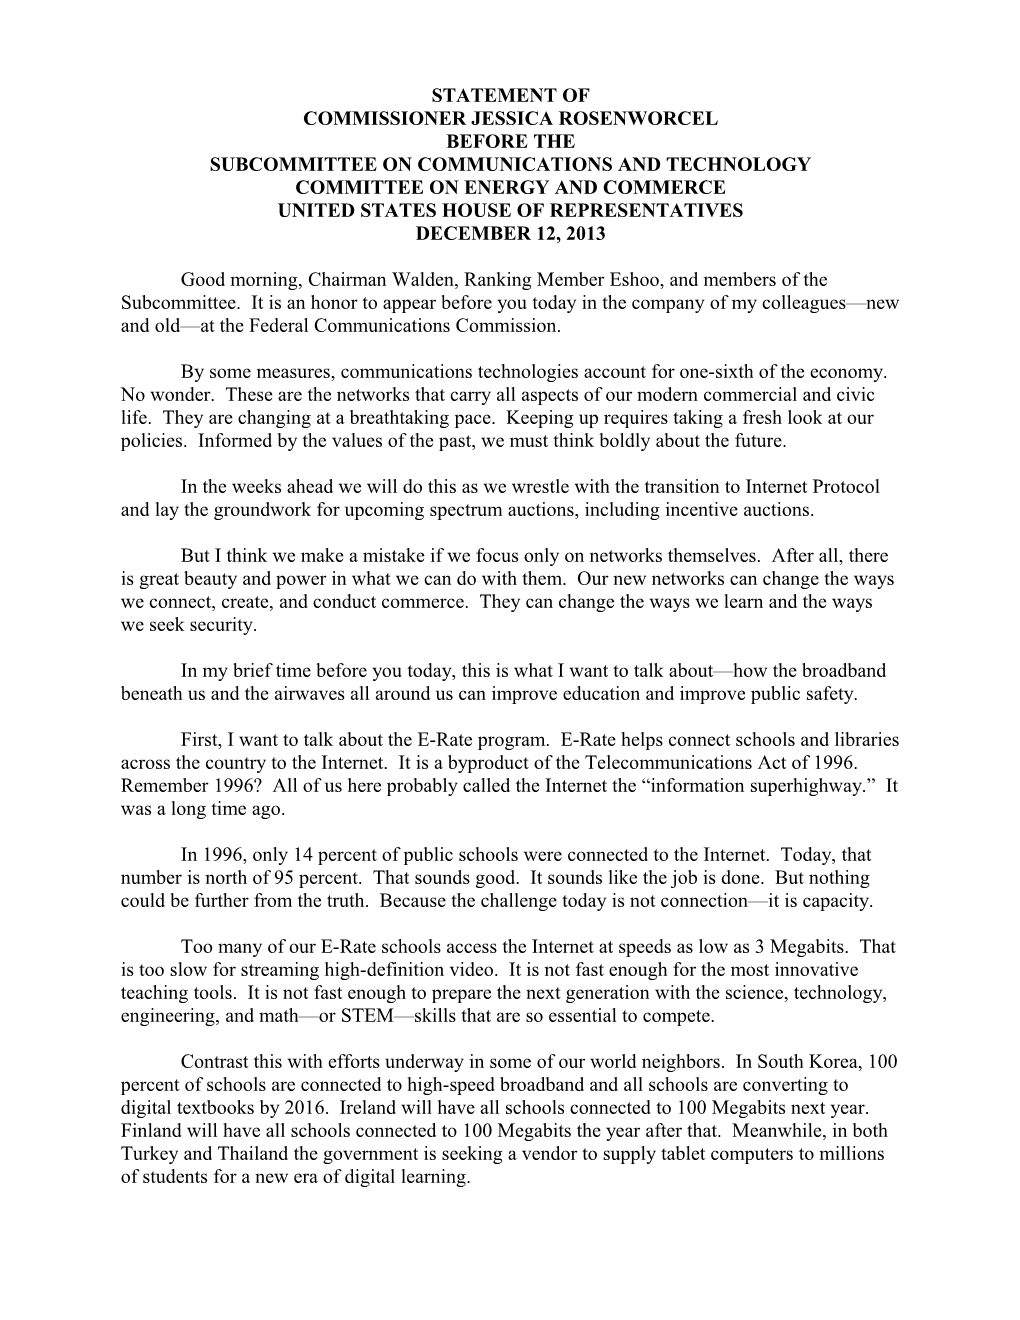 Statement of Commissioner Jessica Rosenworcel Before the Subcommittee on Communications